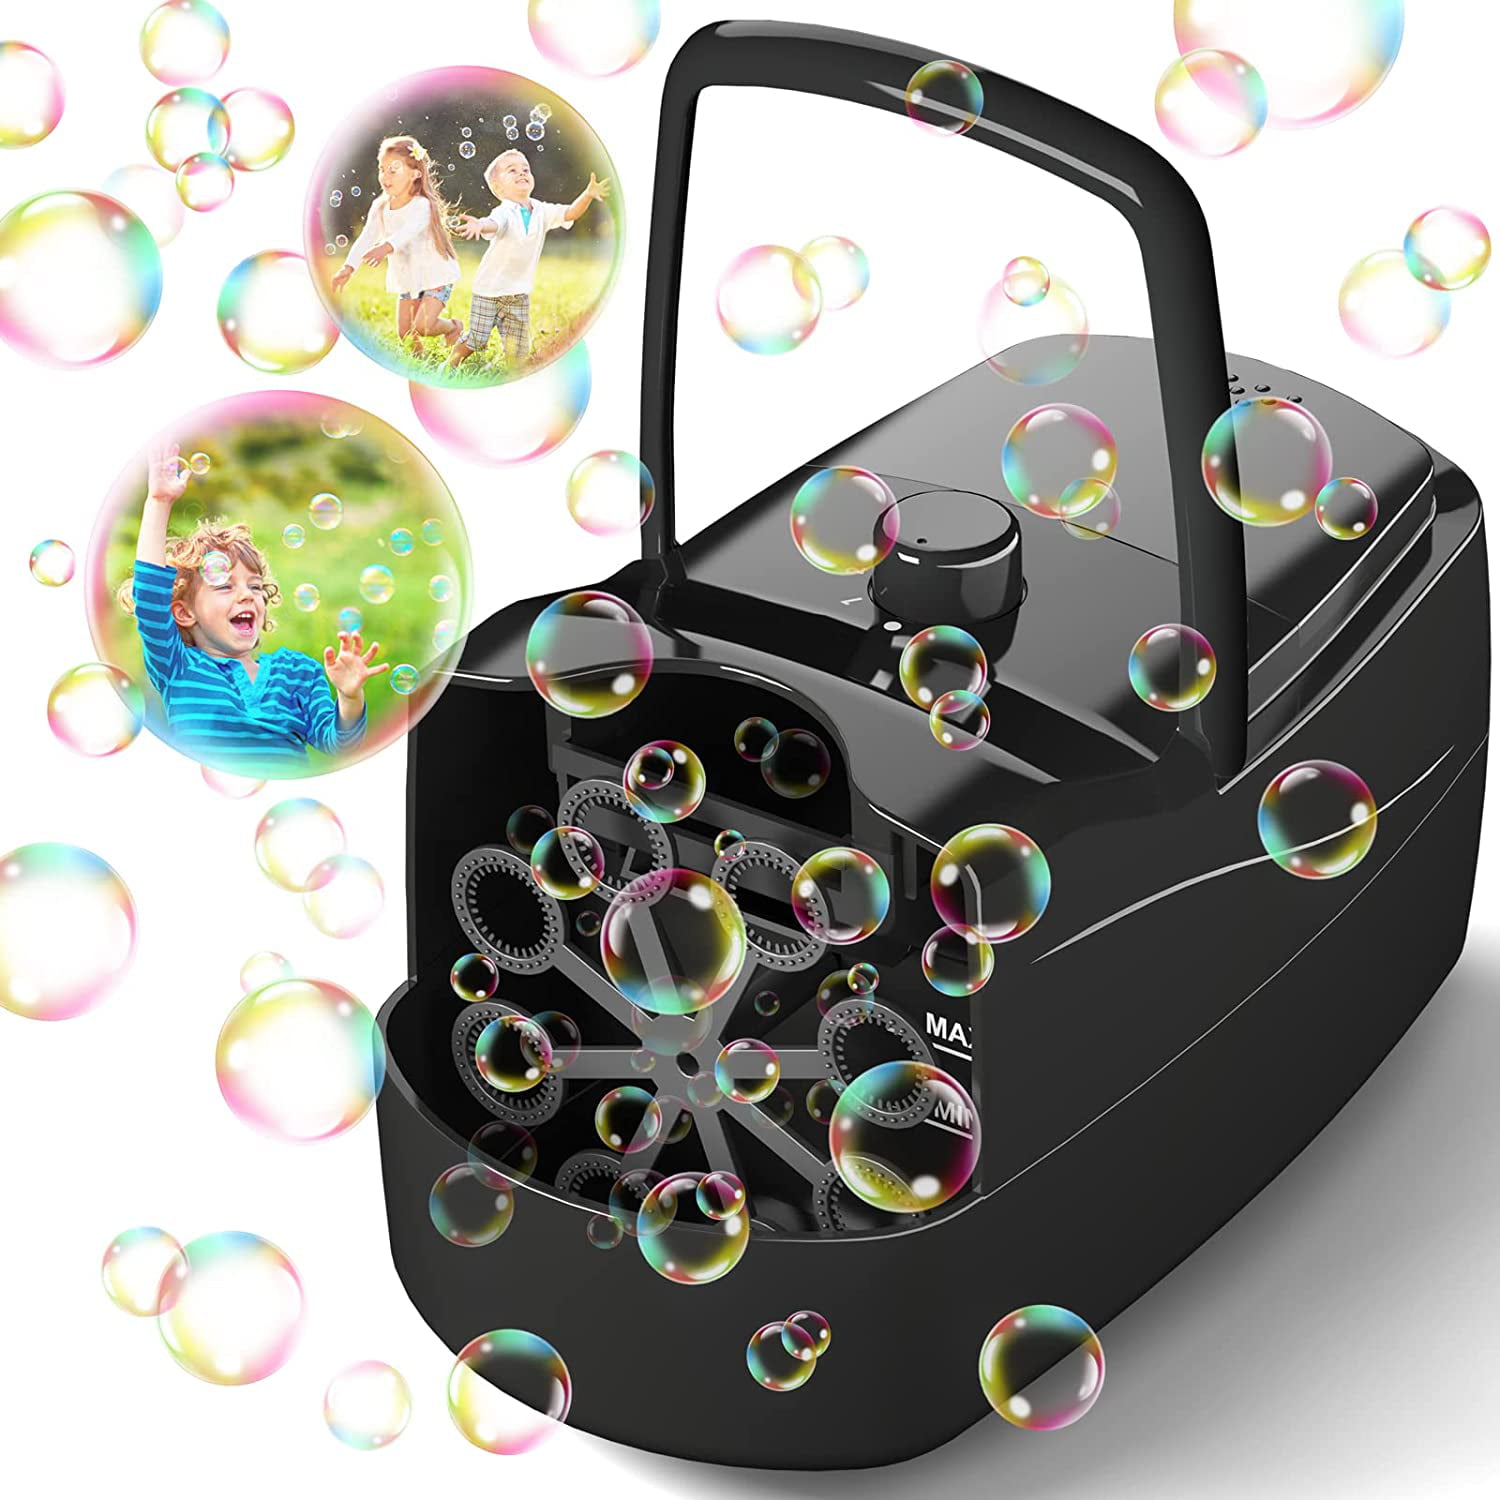 Elover USB Charged Bubble Machine for Kids Automatic Bubble Blower Maker Cute Ca 